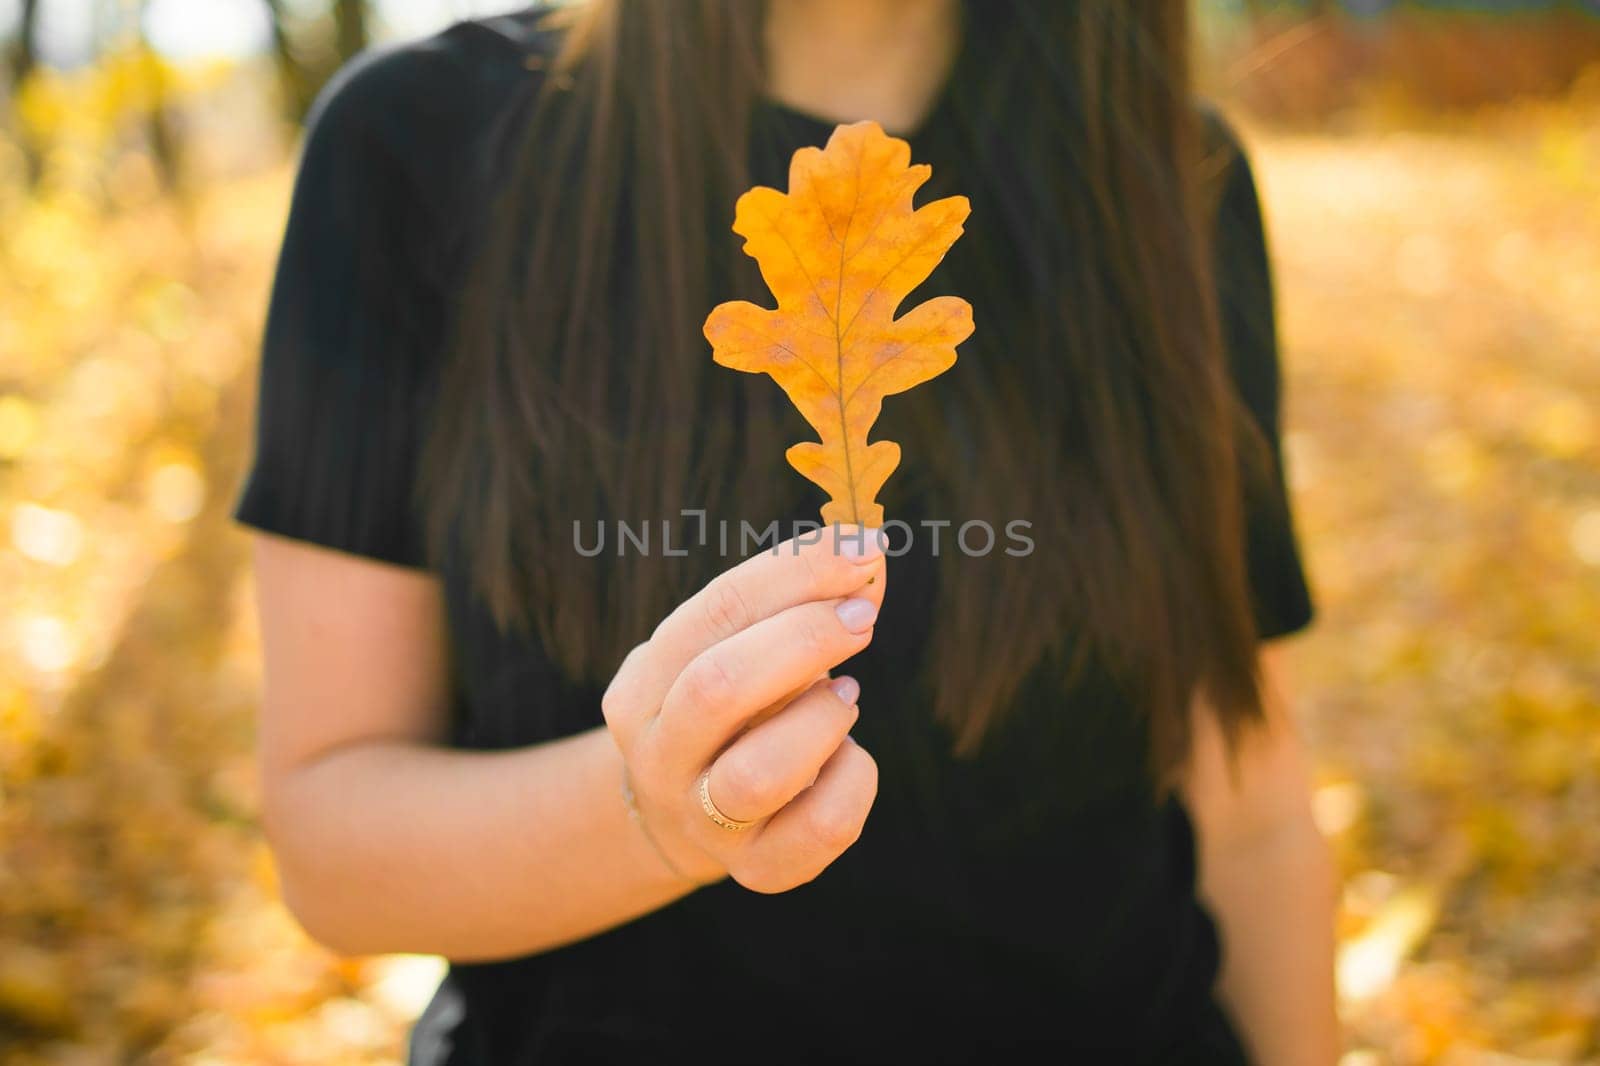 Woman holds yellow oak leaf close-up in hand in fall season - autumn and nature concept by Satura86